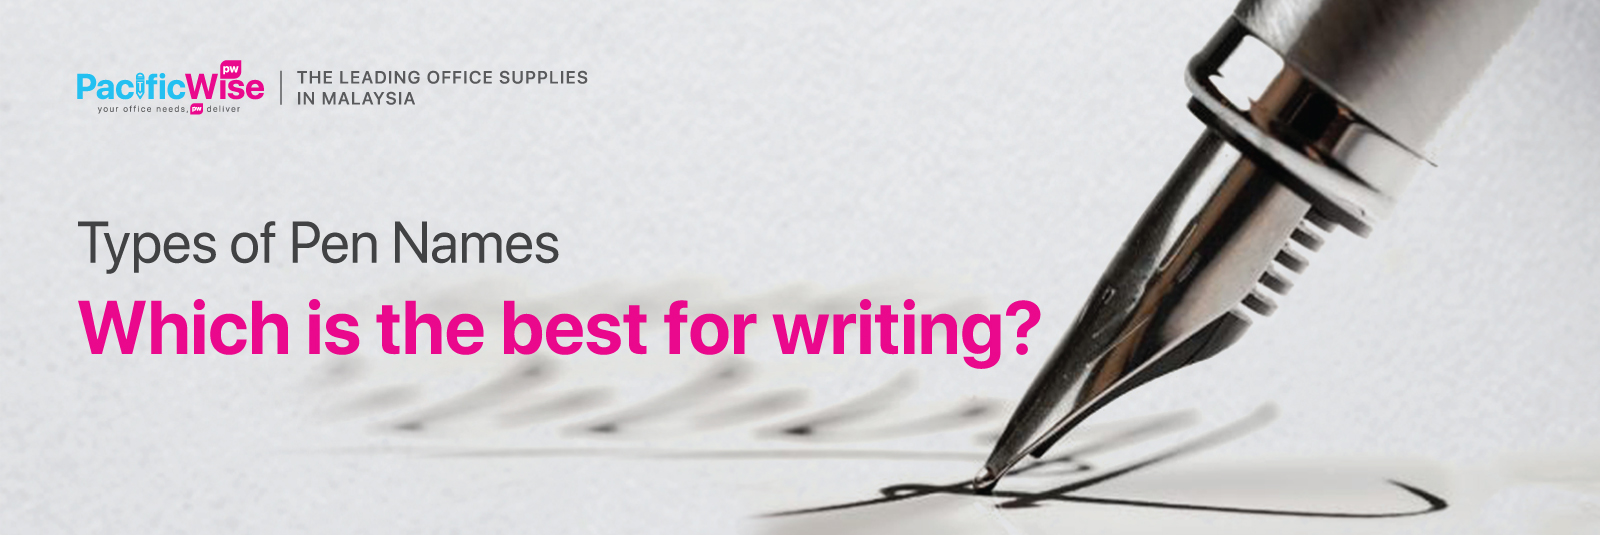 Types of Pen Names Which is the best for writing